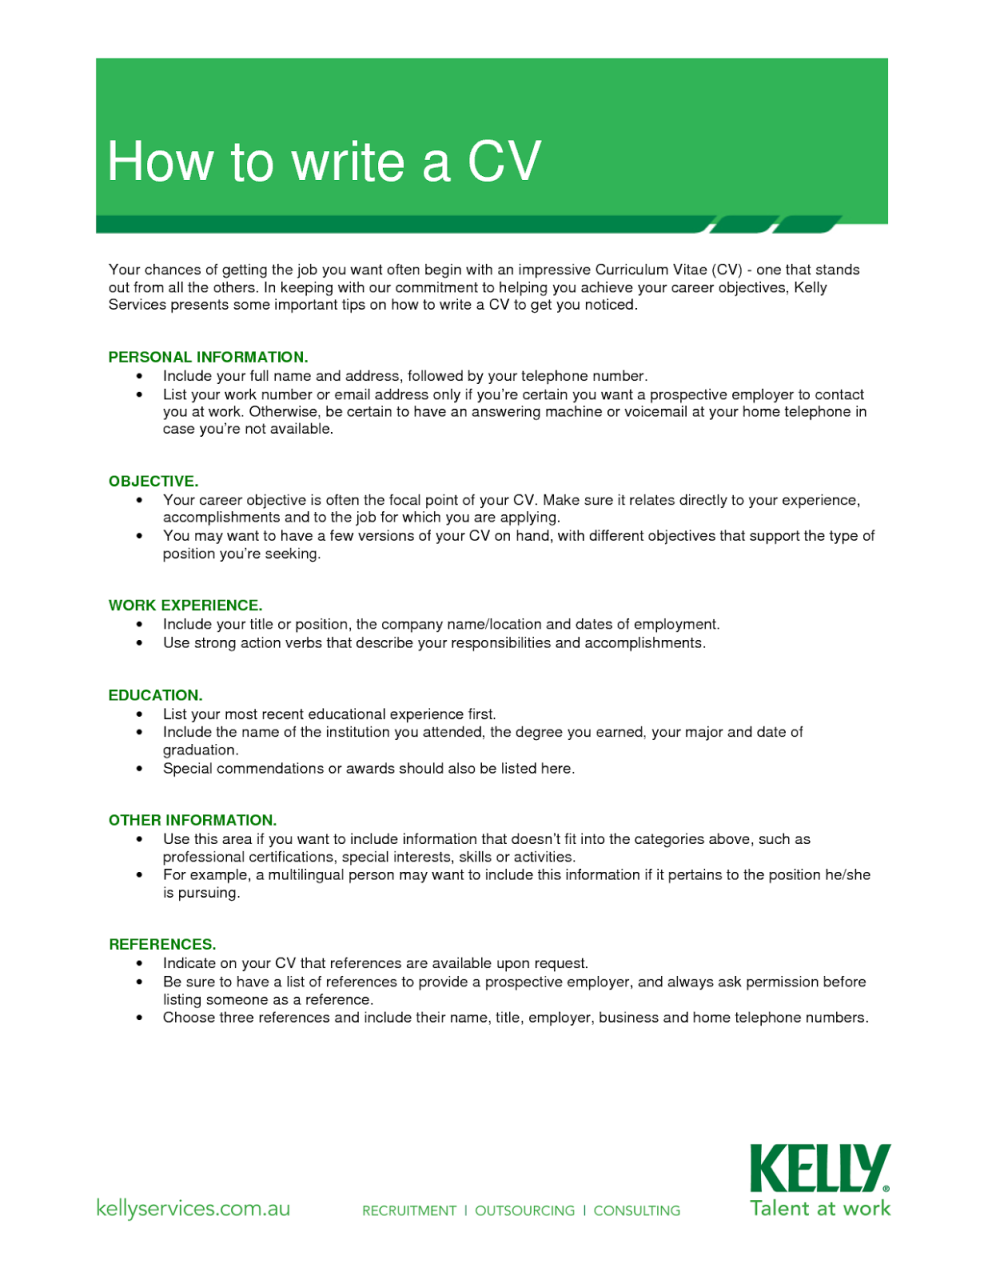 Let's Share How to write a CV (Curriculum vitae) . A quick reference.